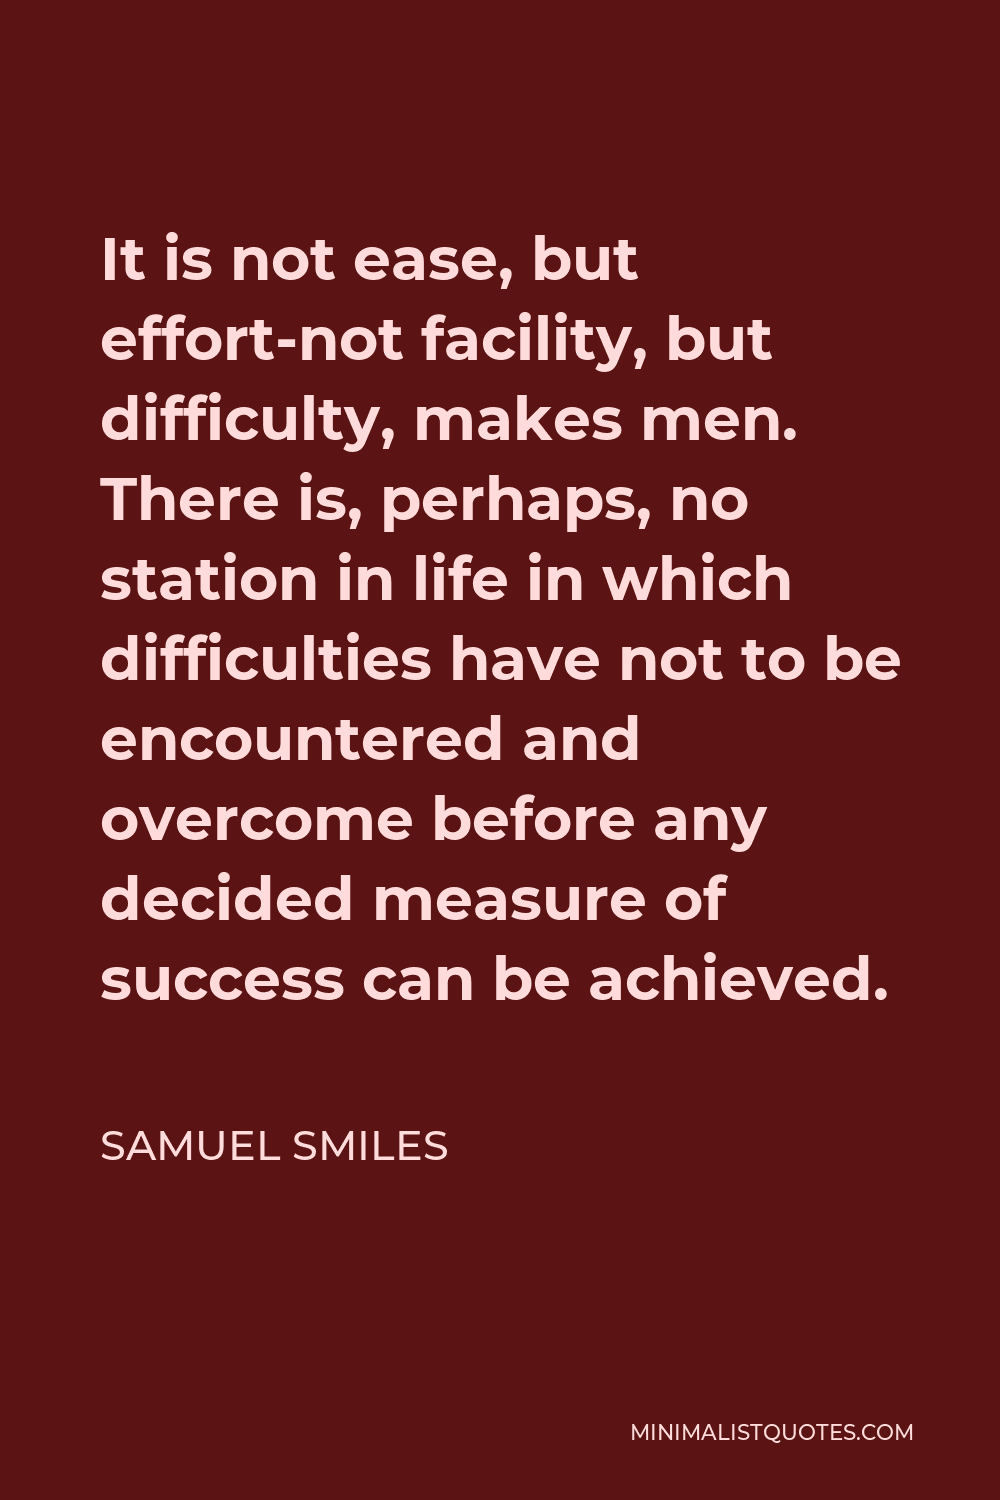 Samuel Smiles Quote - It is not ease, but effort-not facility, but difficulty, makes men. There is, perhaps, no station in life in which difficulties have not to be encountered and overcome before any decided measure of success can be achieved.